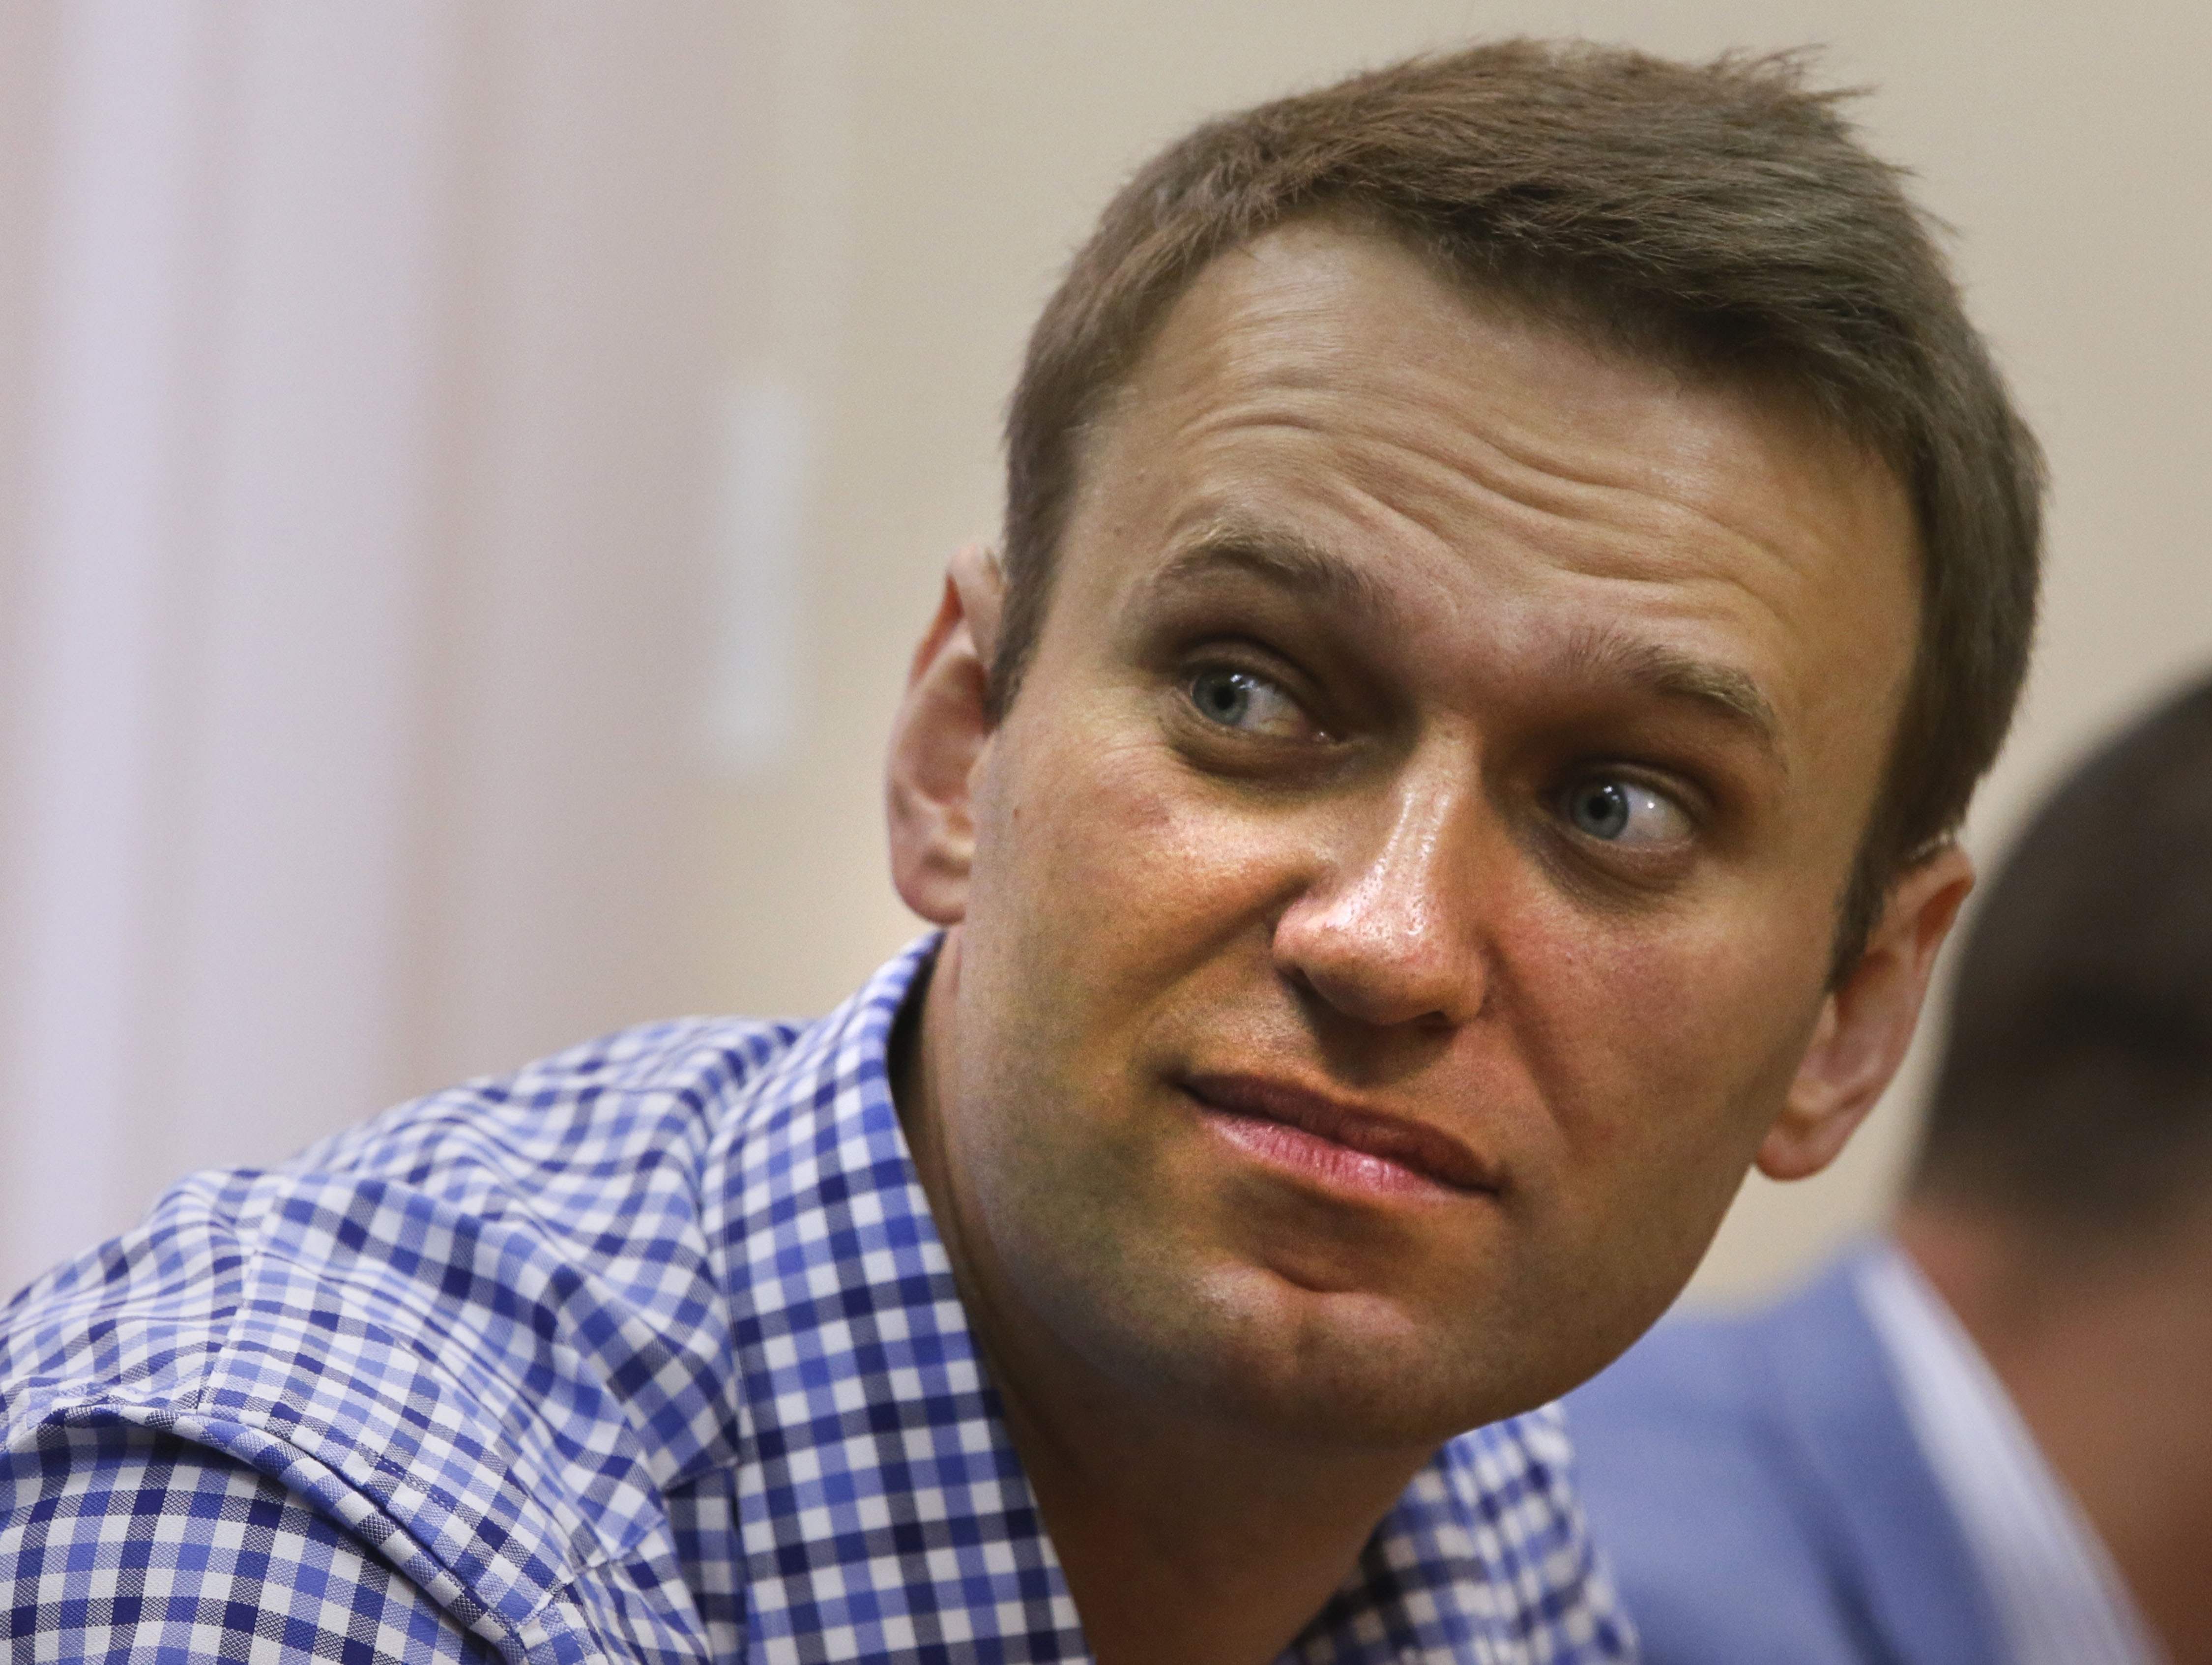 alexei-navalny-russia-opposition-leader-sentenced-to-5-years-for